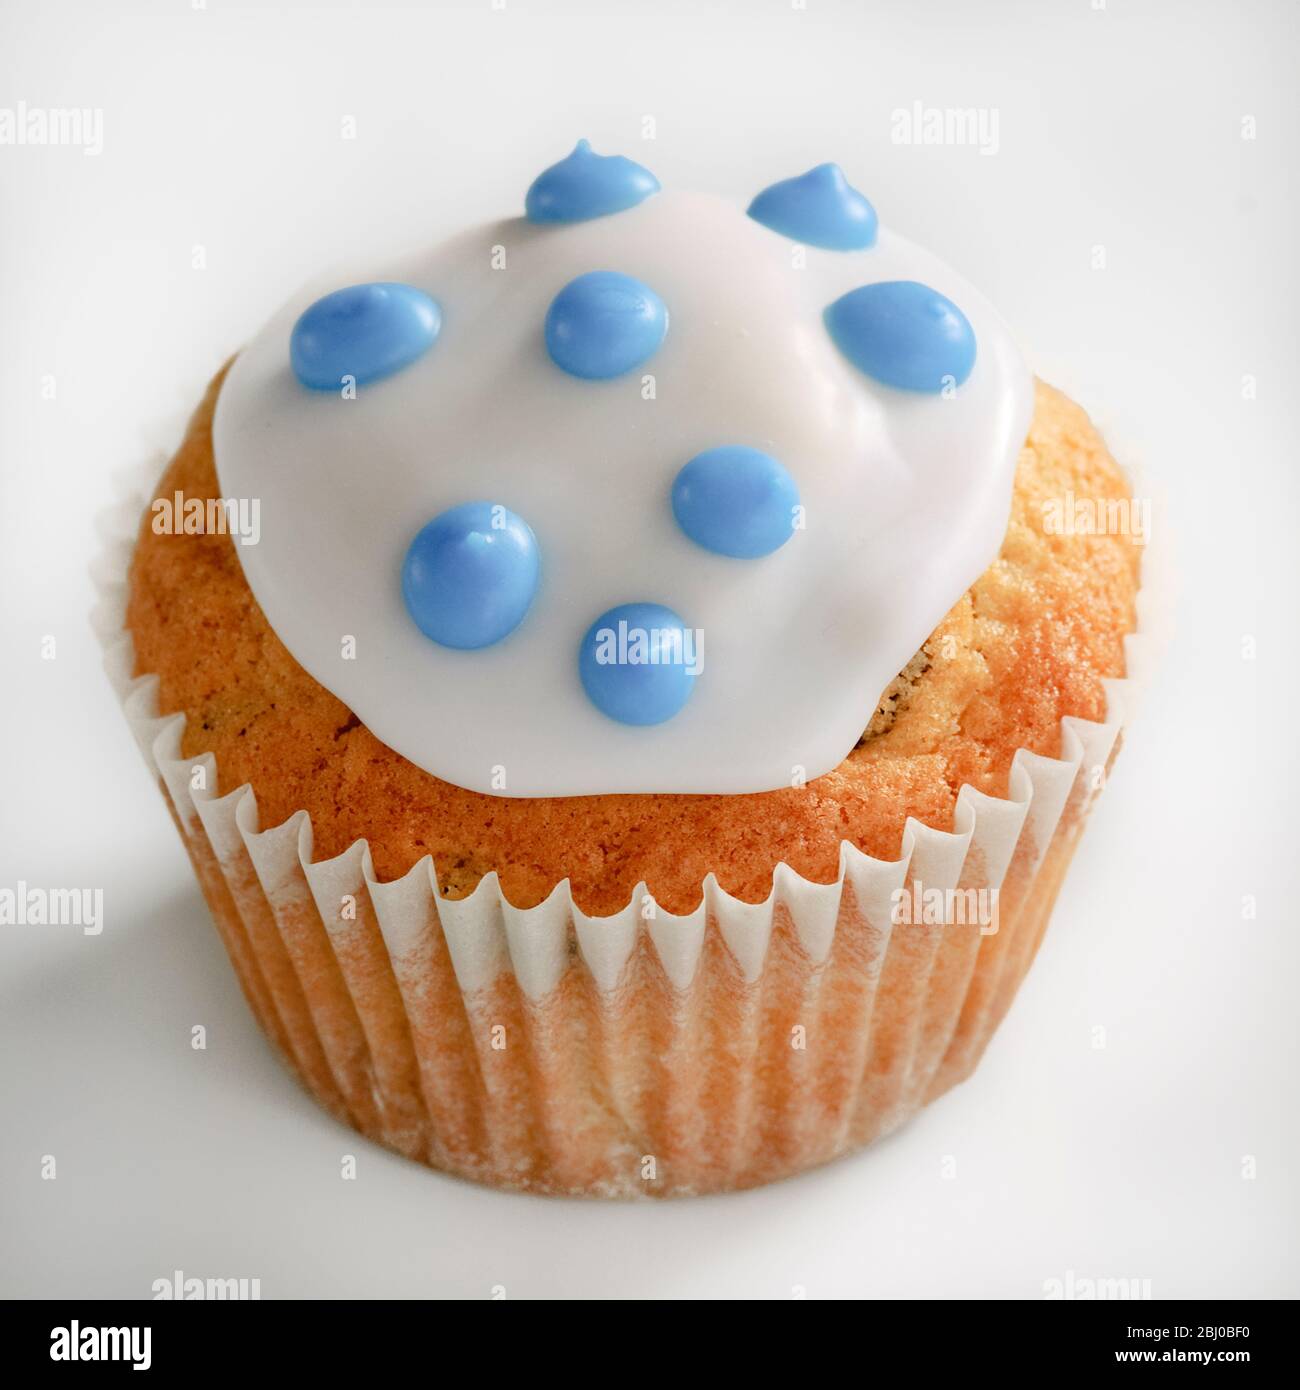 Iced cupcake with blue spots on white icing - Stock Photo